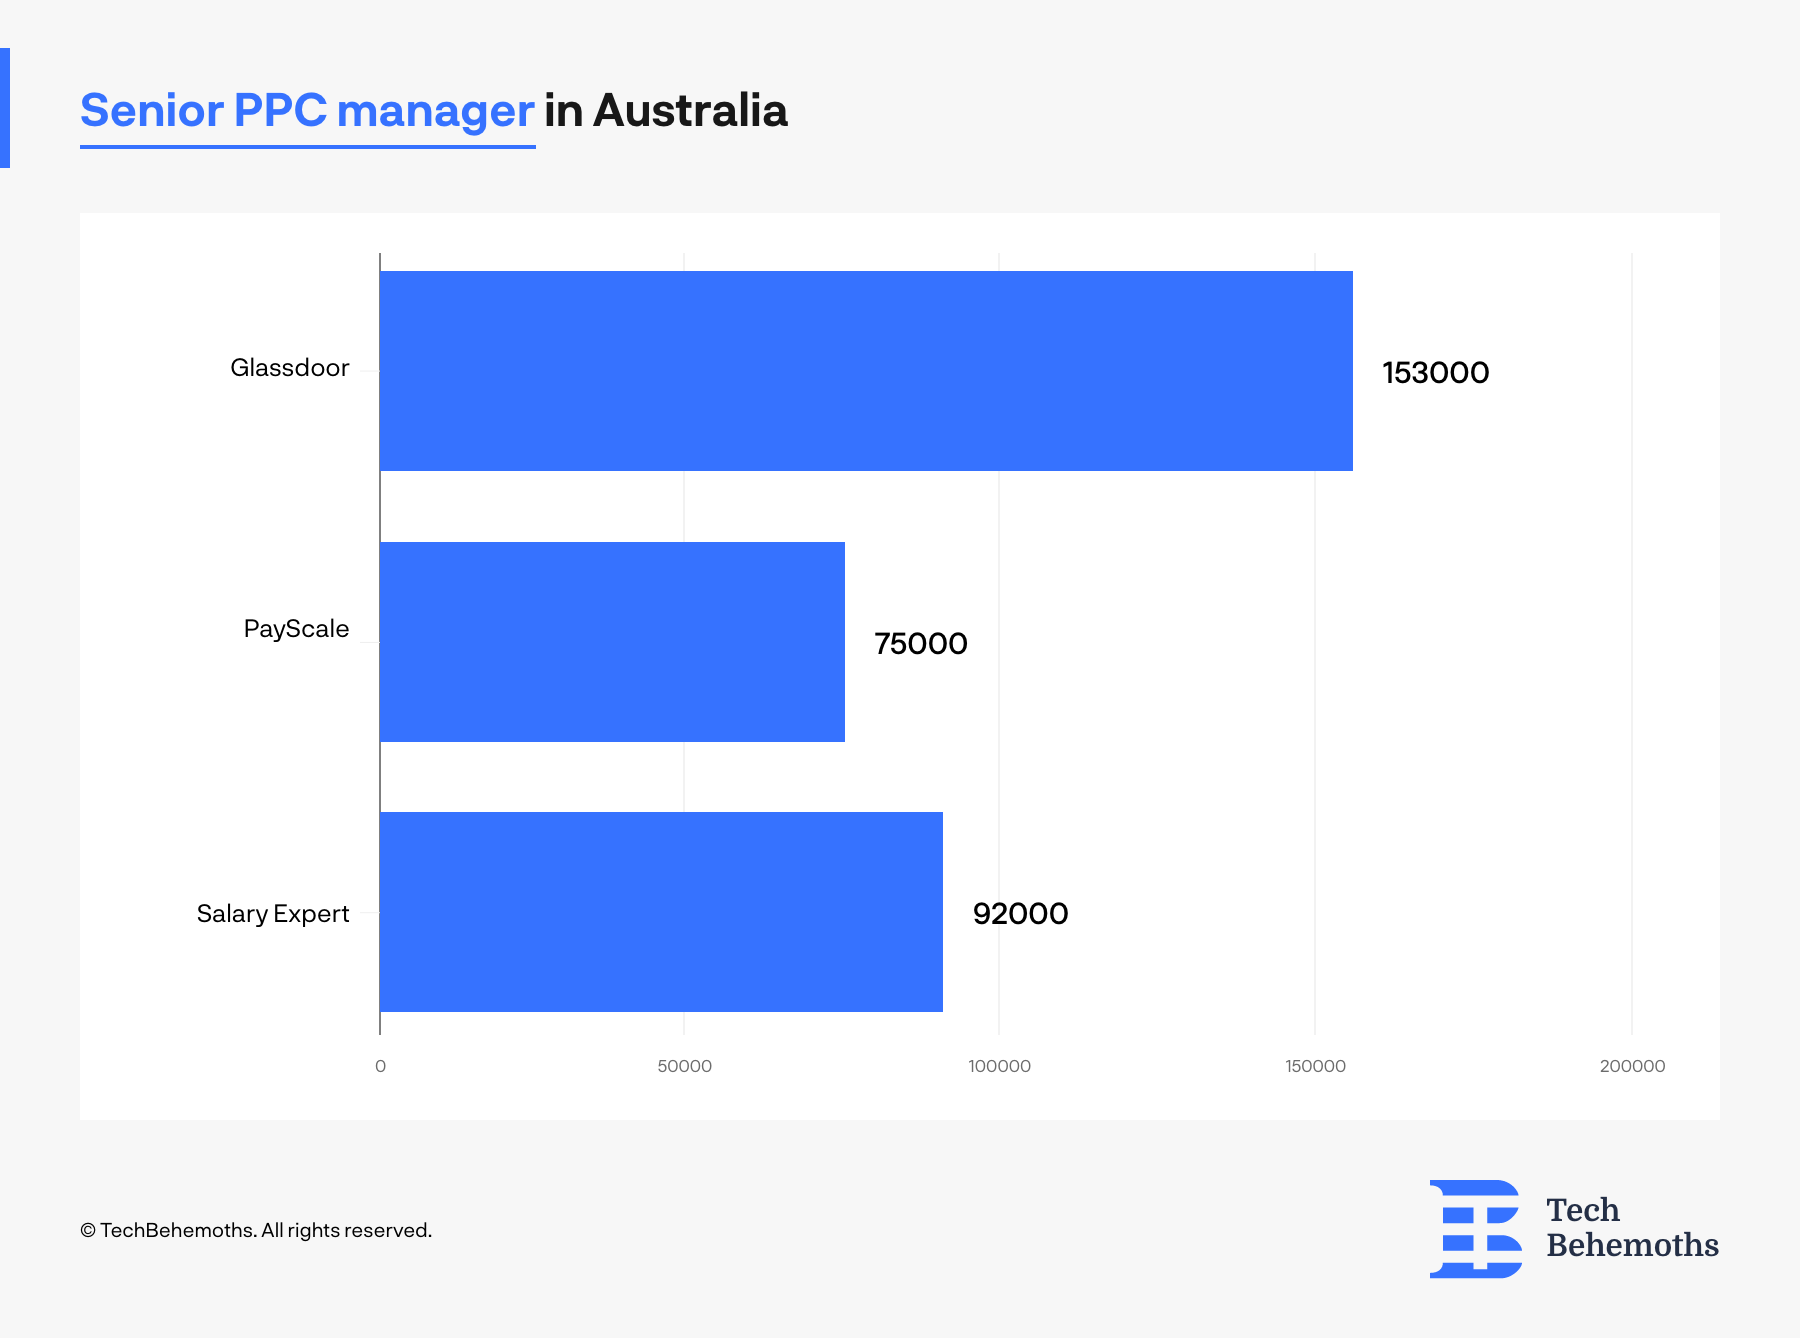 Salaries for Senior PPC managers in Australia according to multiple sources